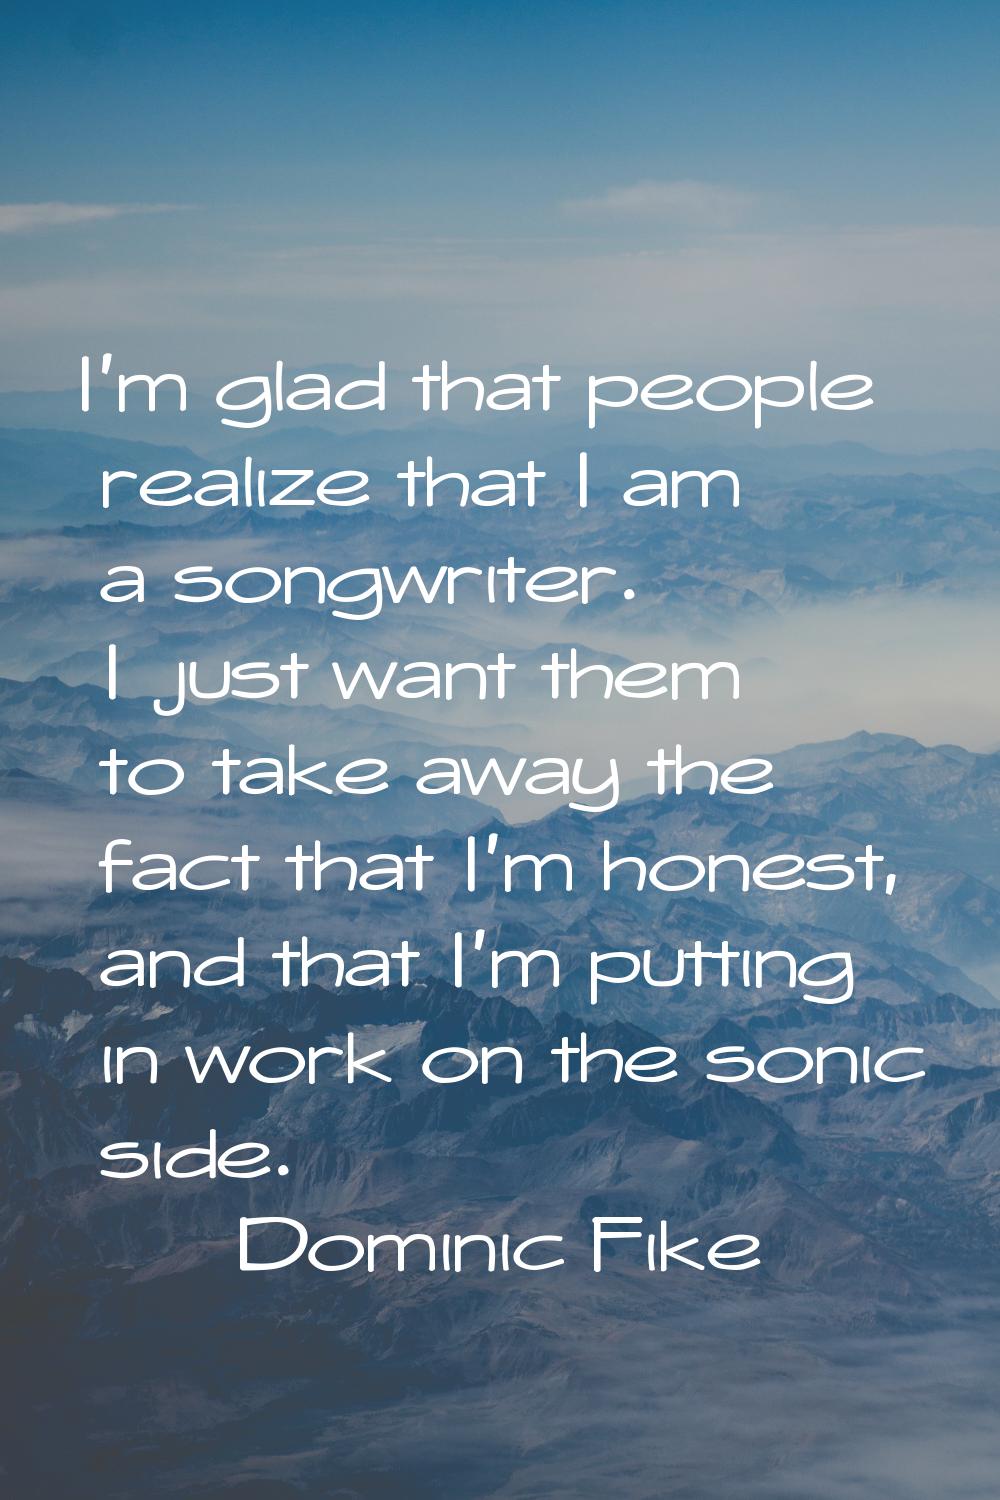 I'm glad that people realize that I am a songwriter. I just want them to take away the fact that I'